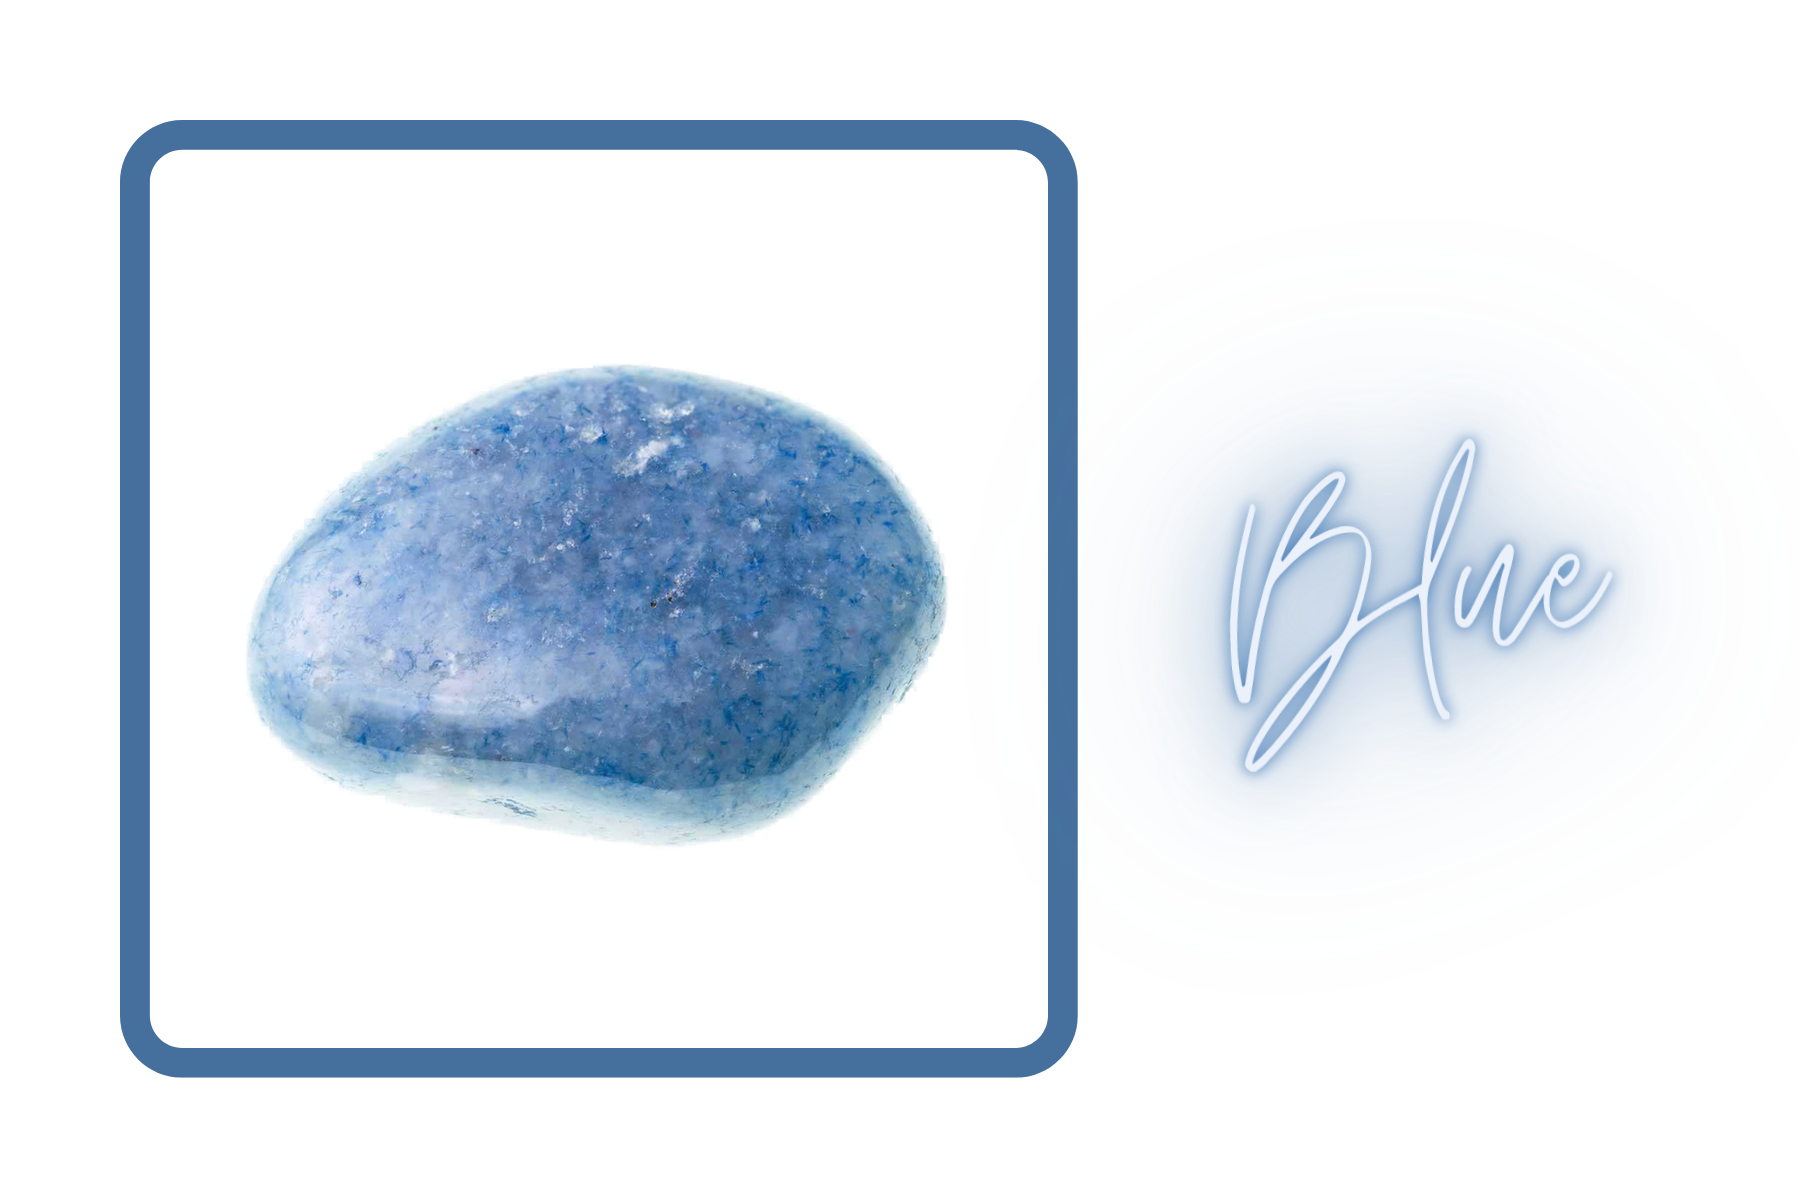 Blue Aventurine stone on a blue box with the word "blue" and a blue light effect